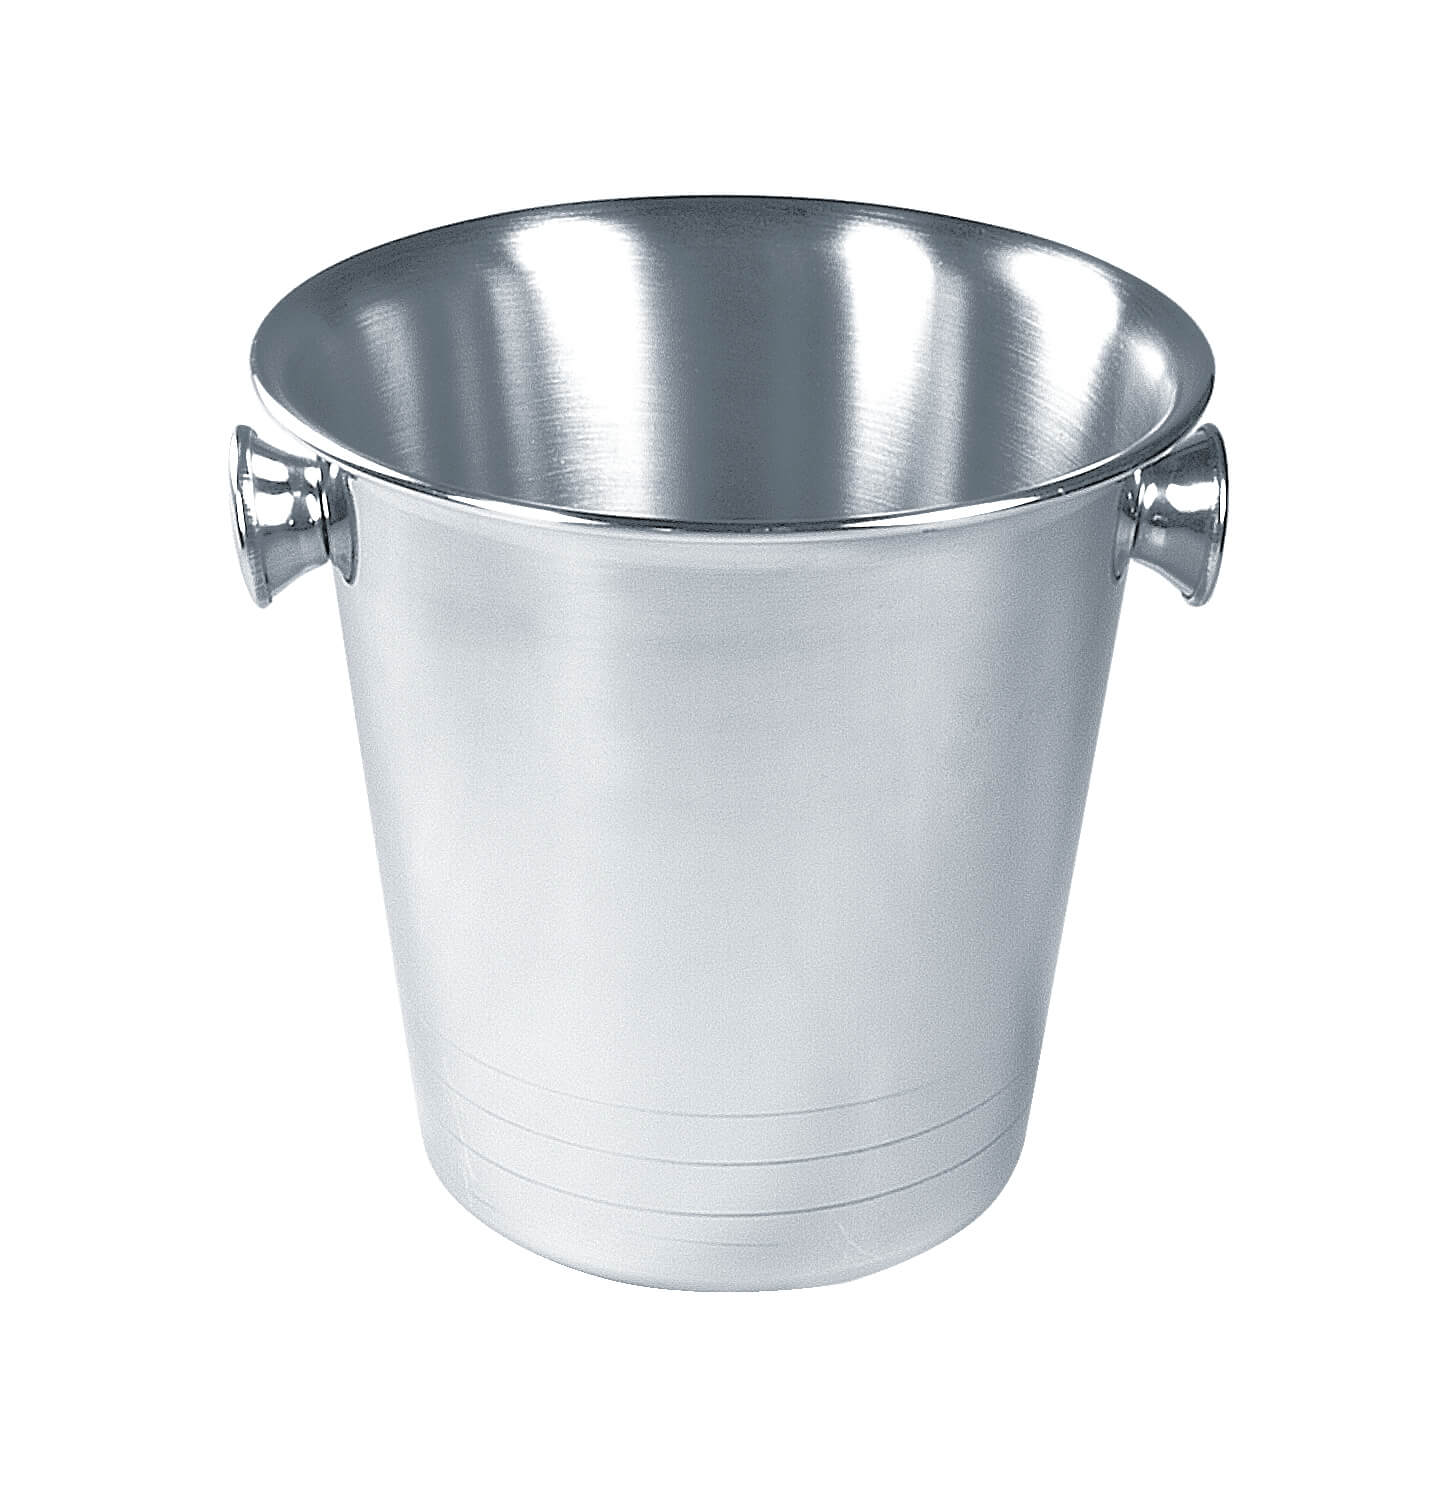 Bottle cooler - Piccolo stainless steel, 13cm